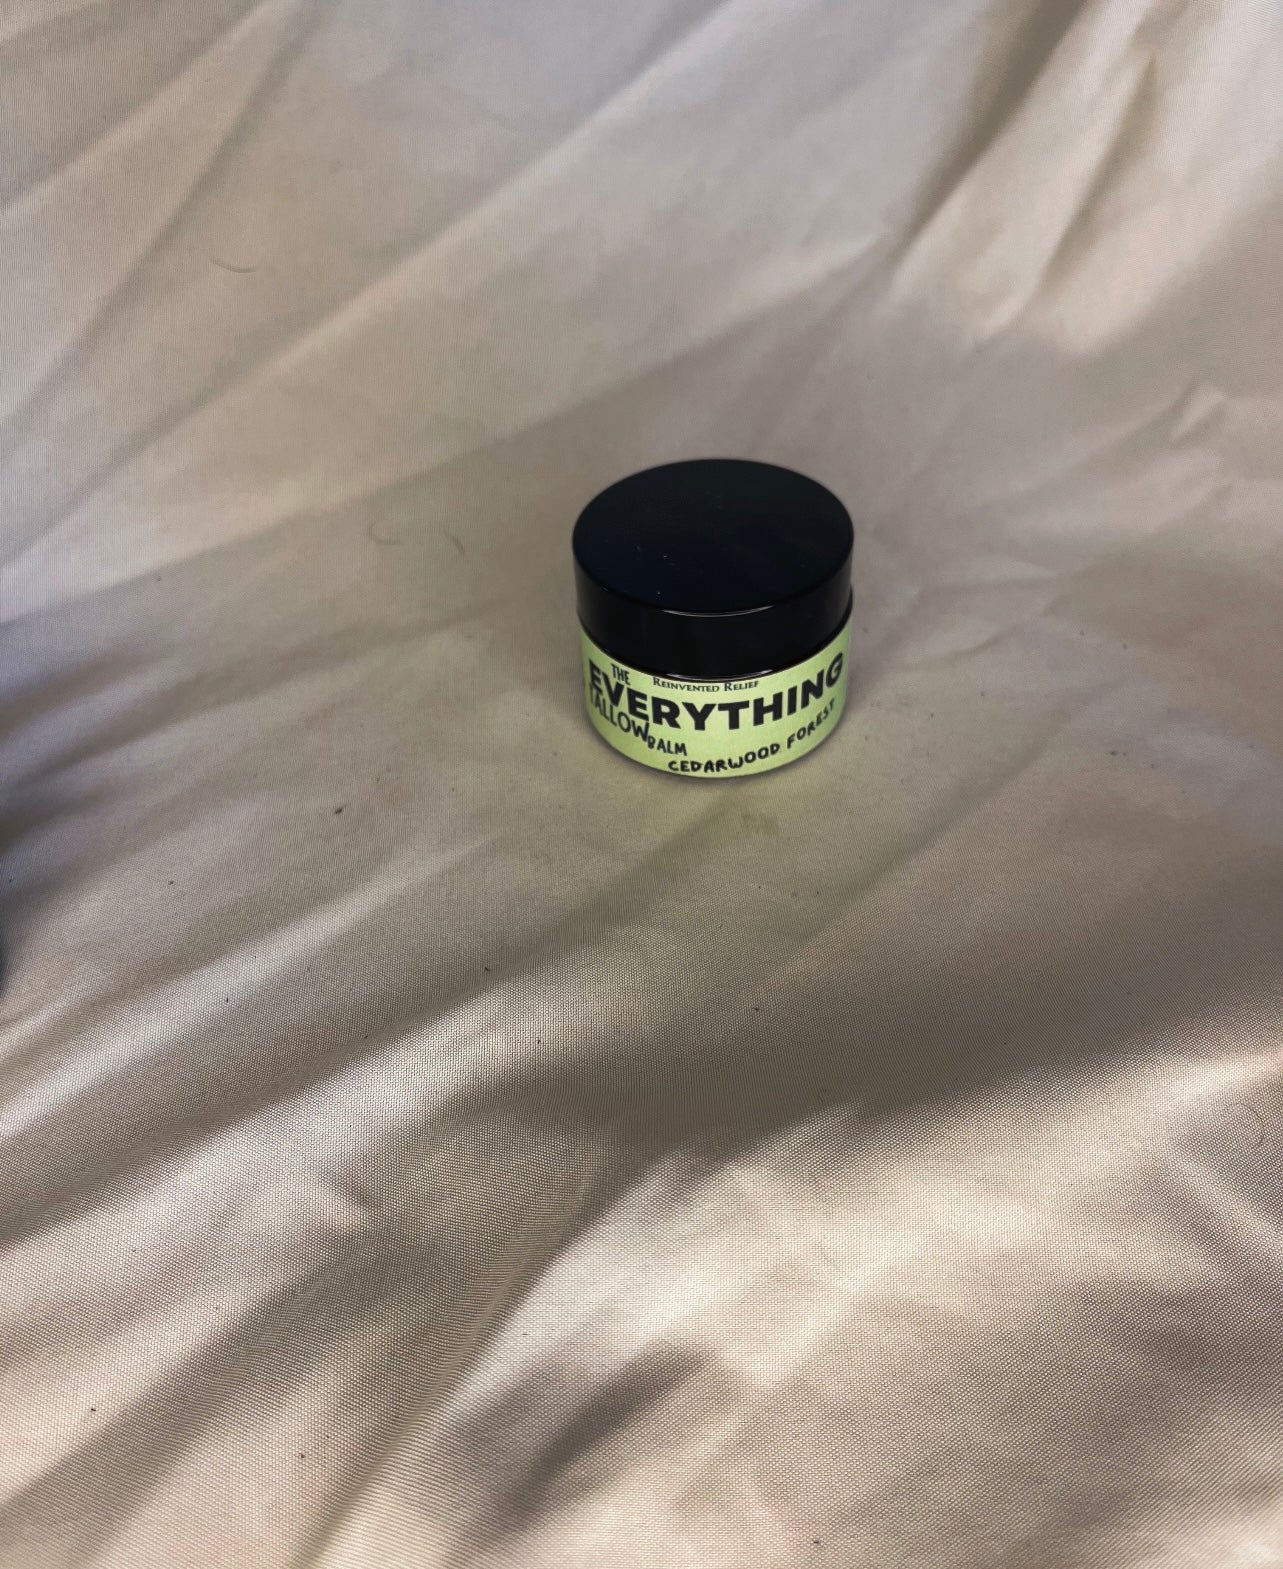 The EVERYTHING Tallow Balm